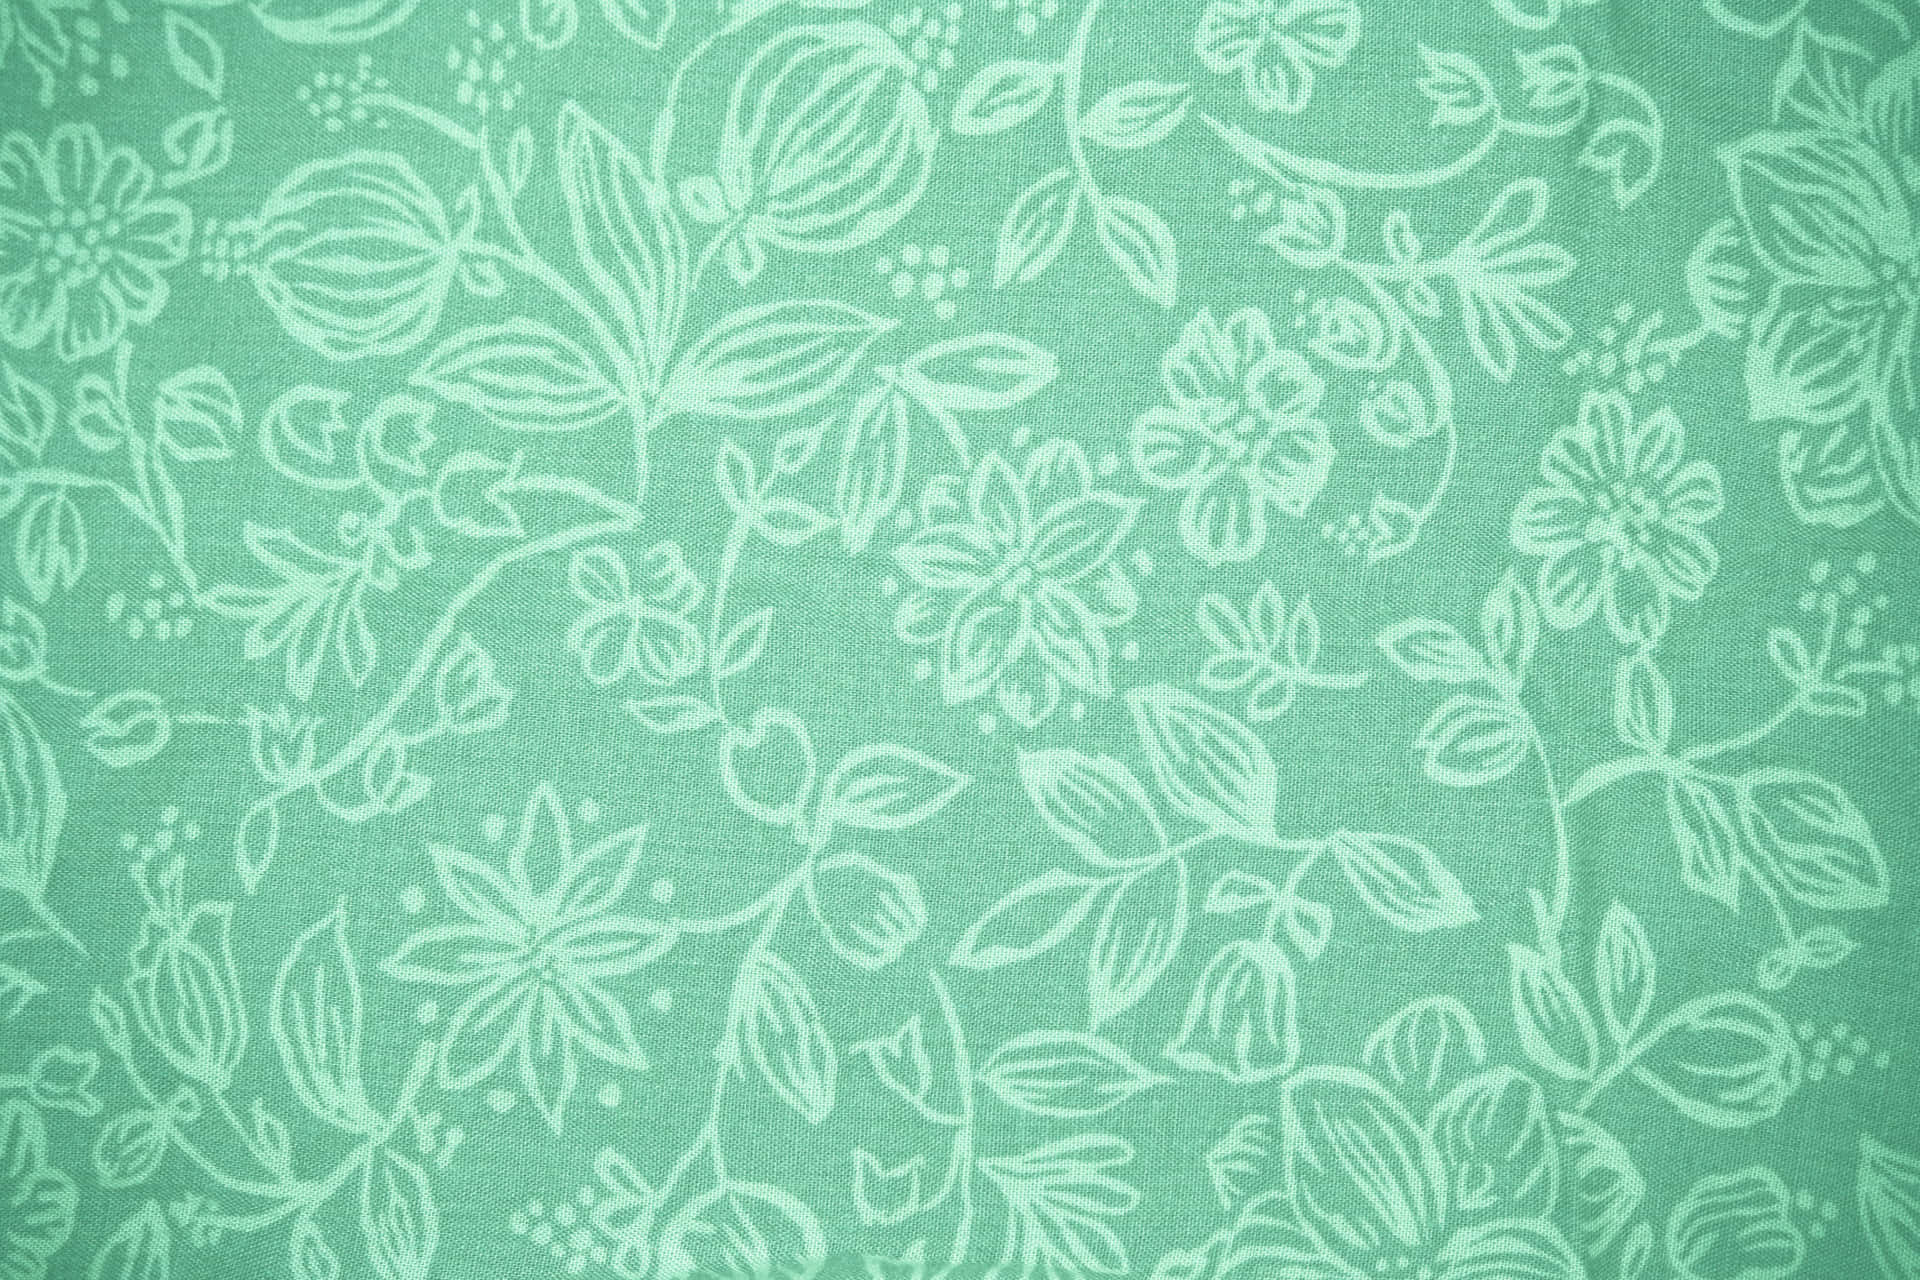 A Green Floral Fabric With White Flowers